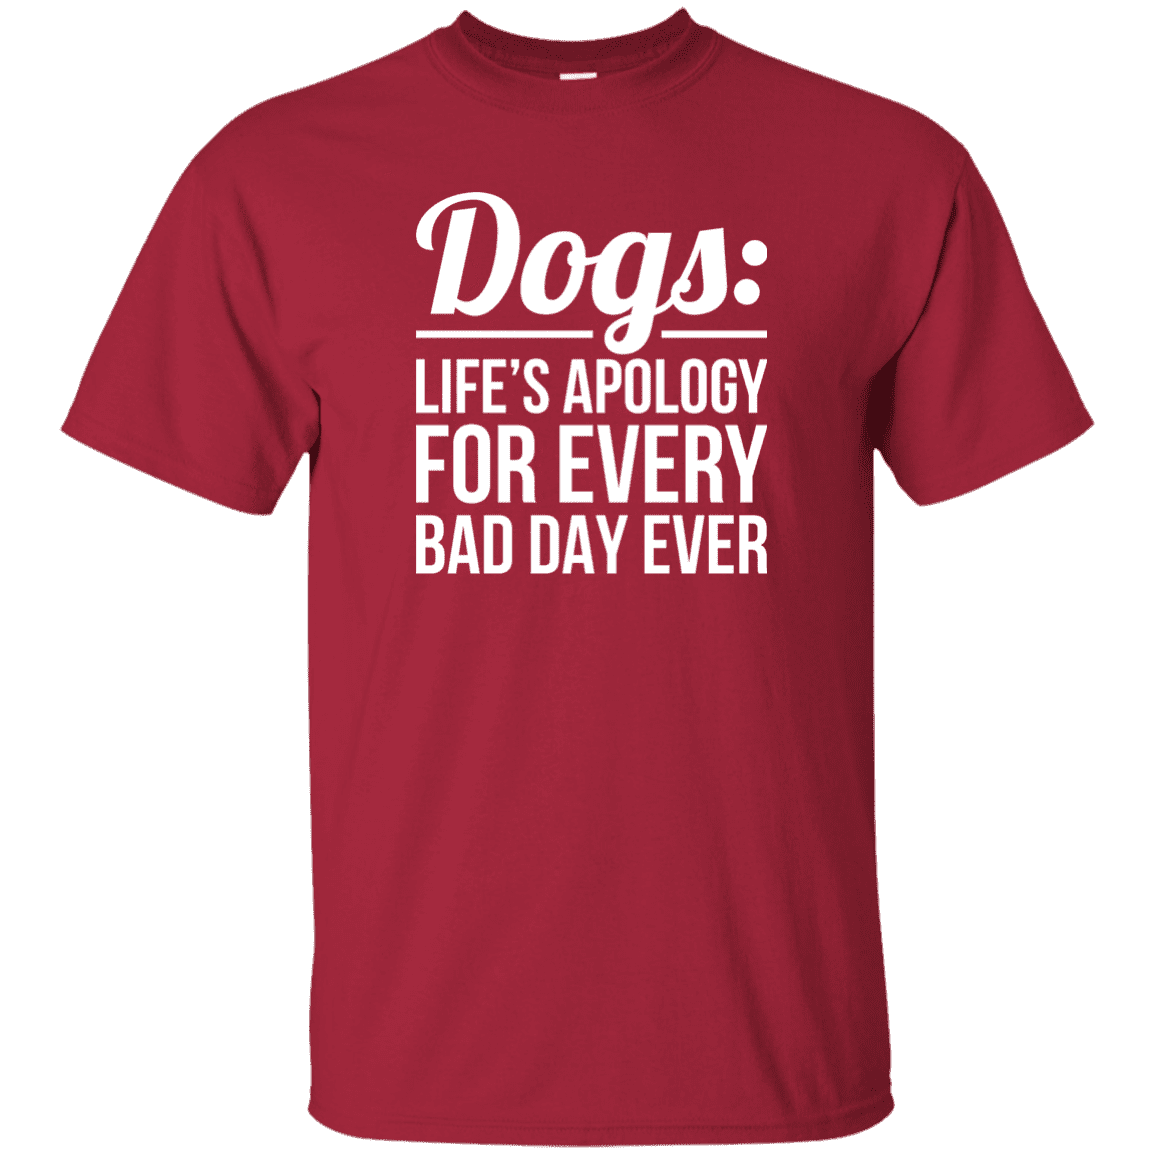 Dogs Life's Apology - T Shirt.